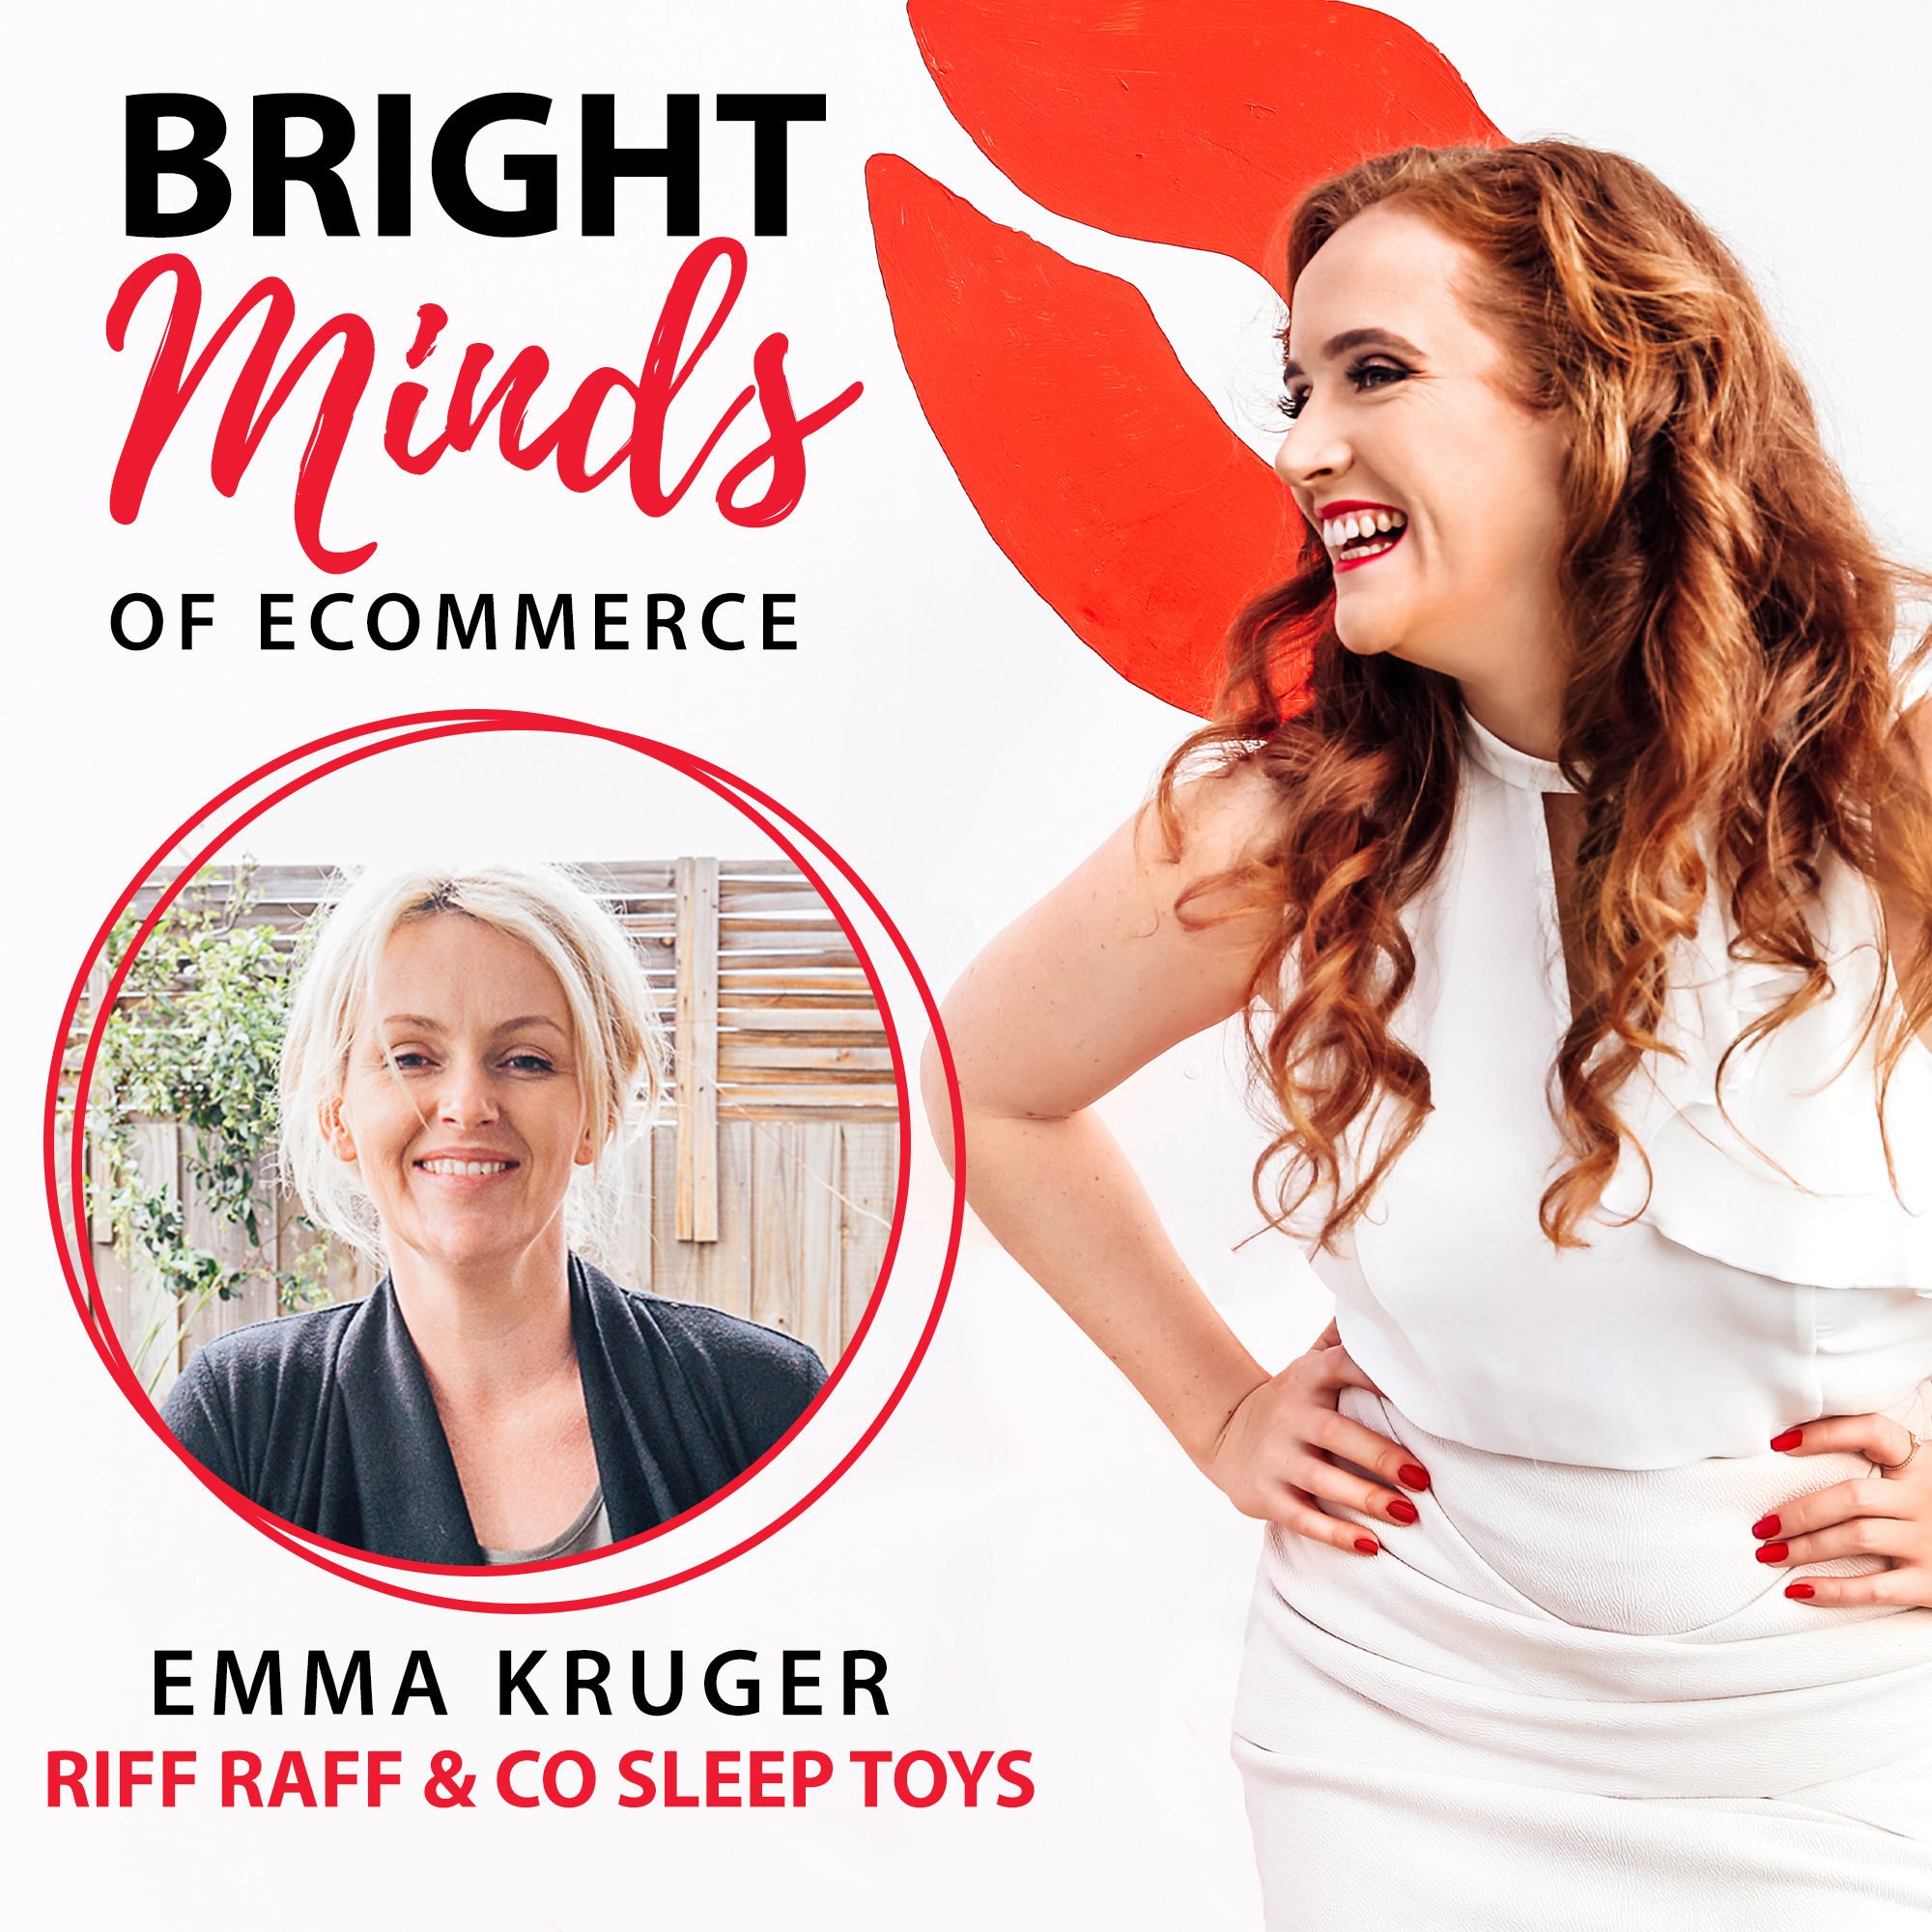 From idea creation to scaling an international business with Emma Kruger from Riff Raff Sleep Toys